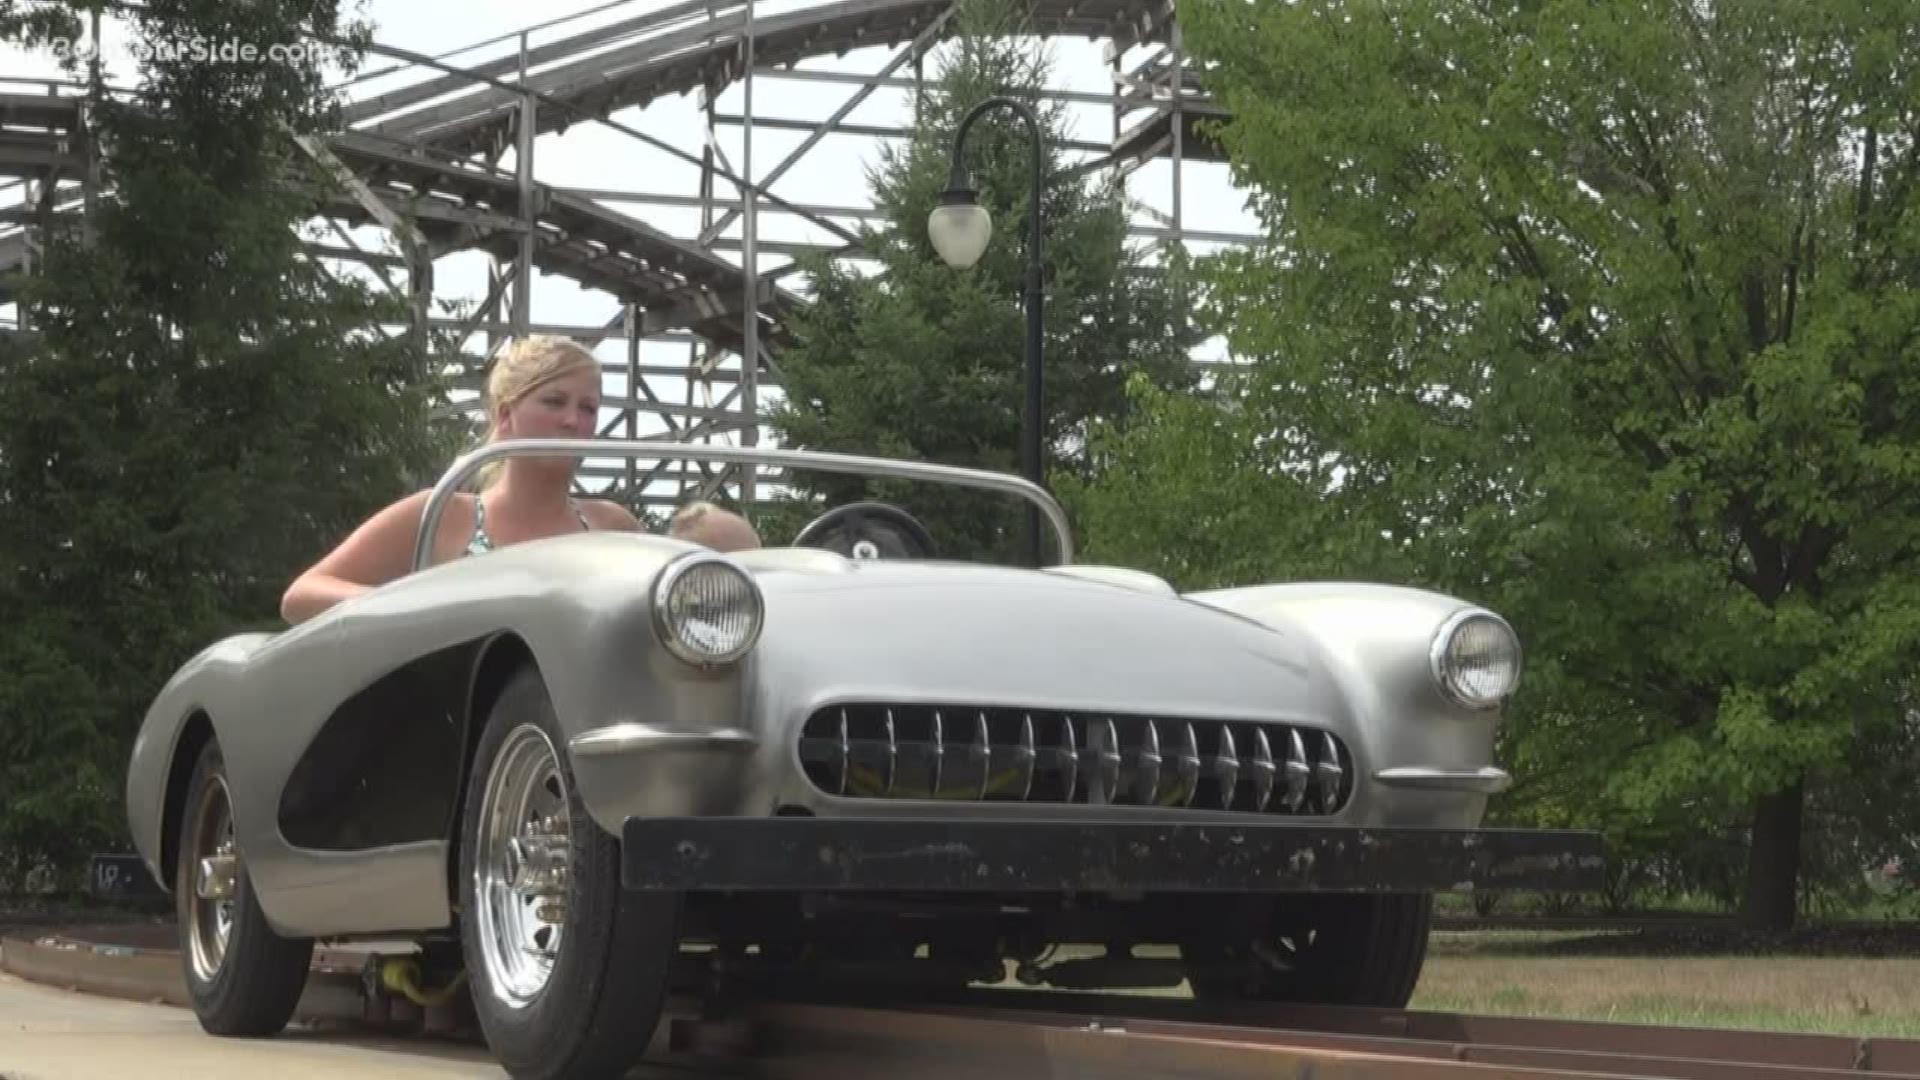 Michigan's Adventure phasing out vintage car ride